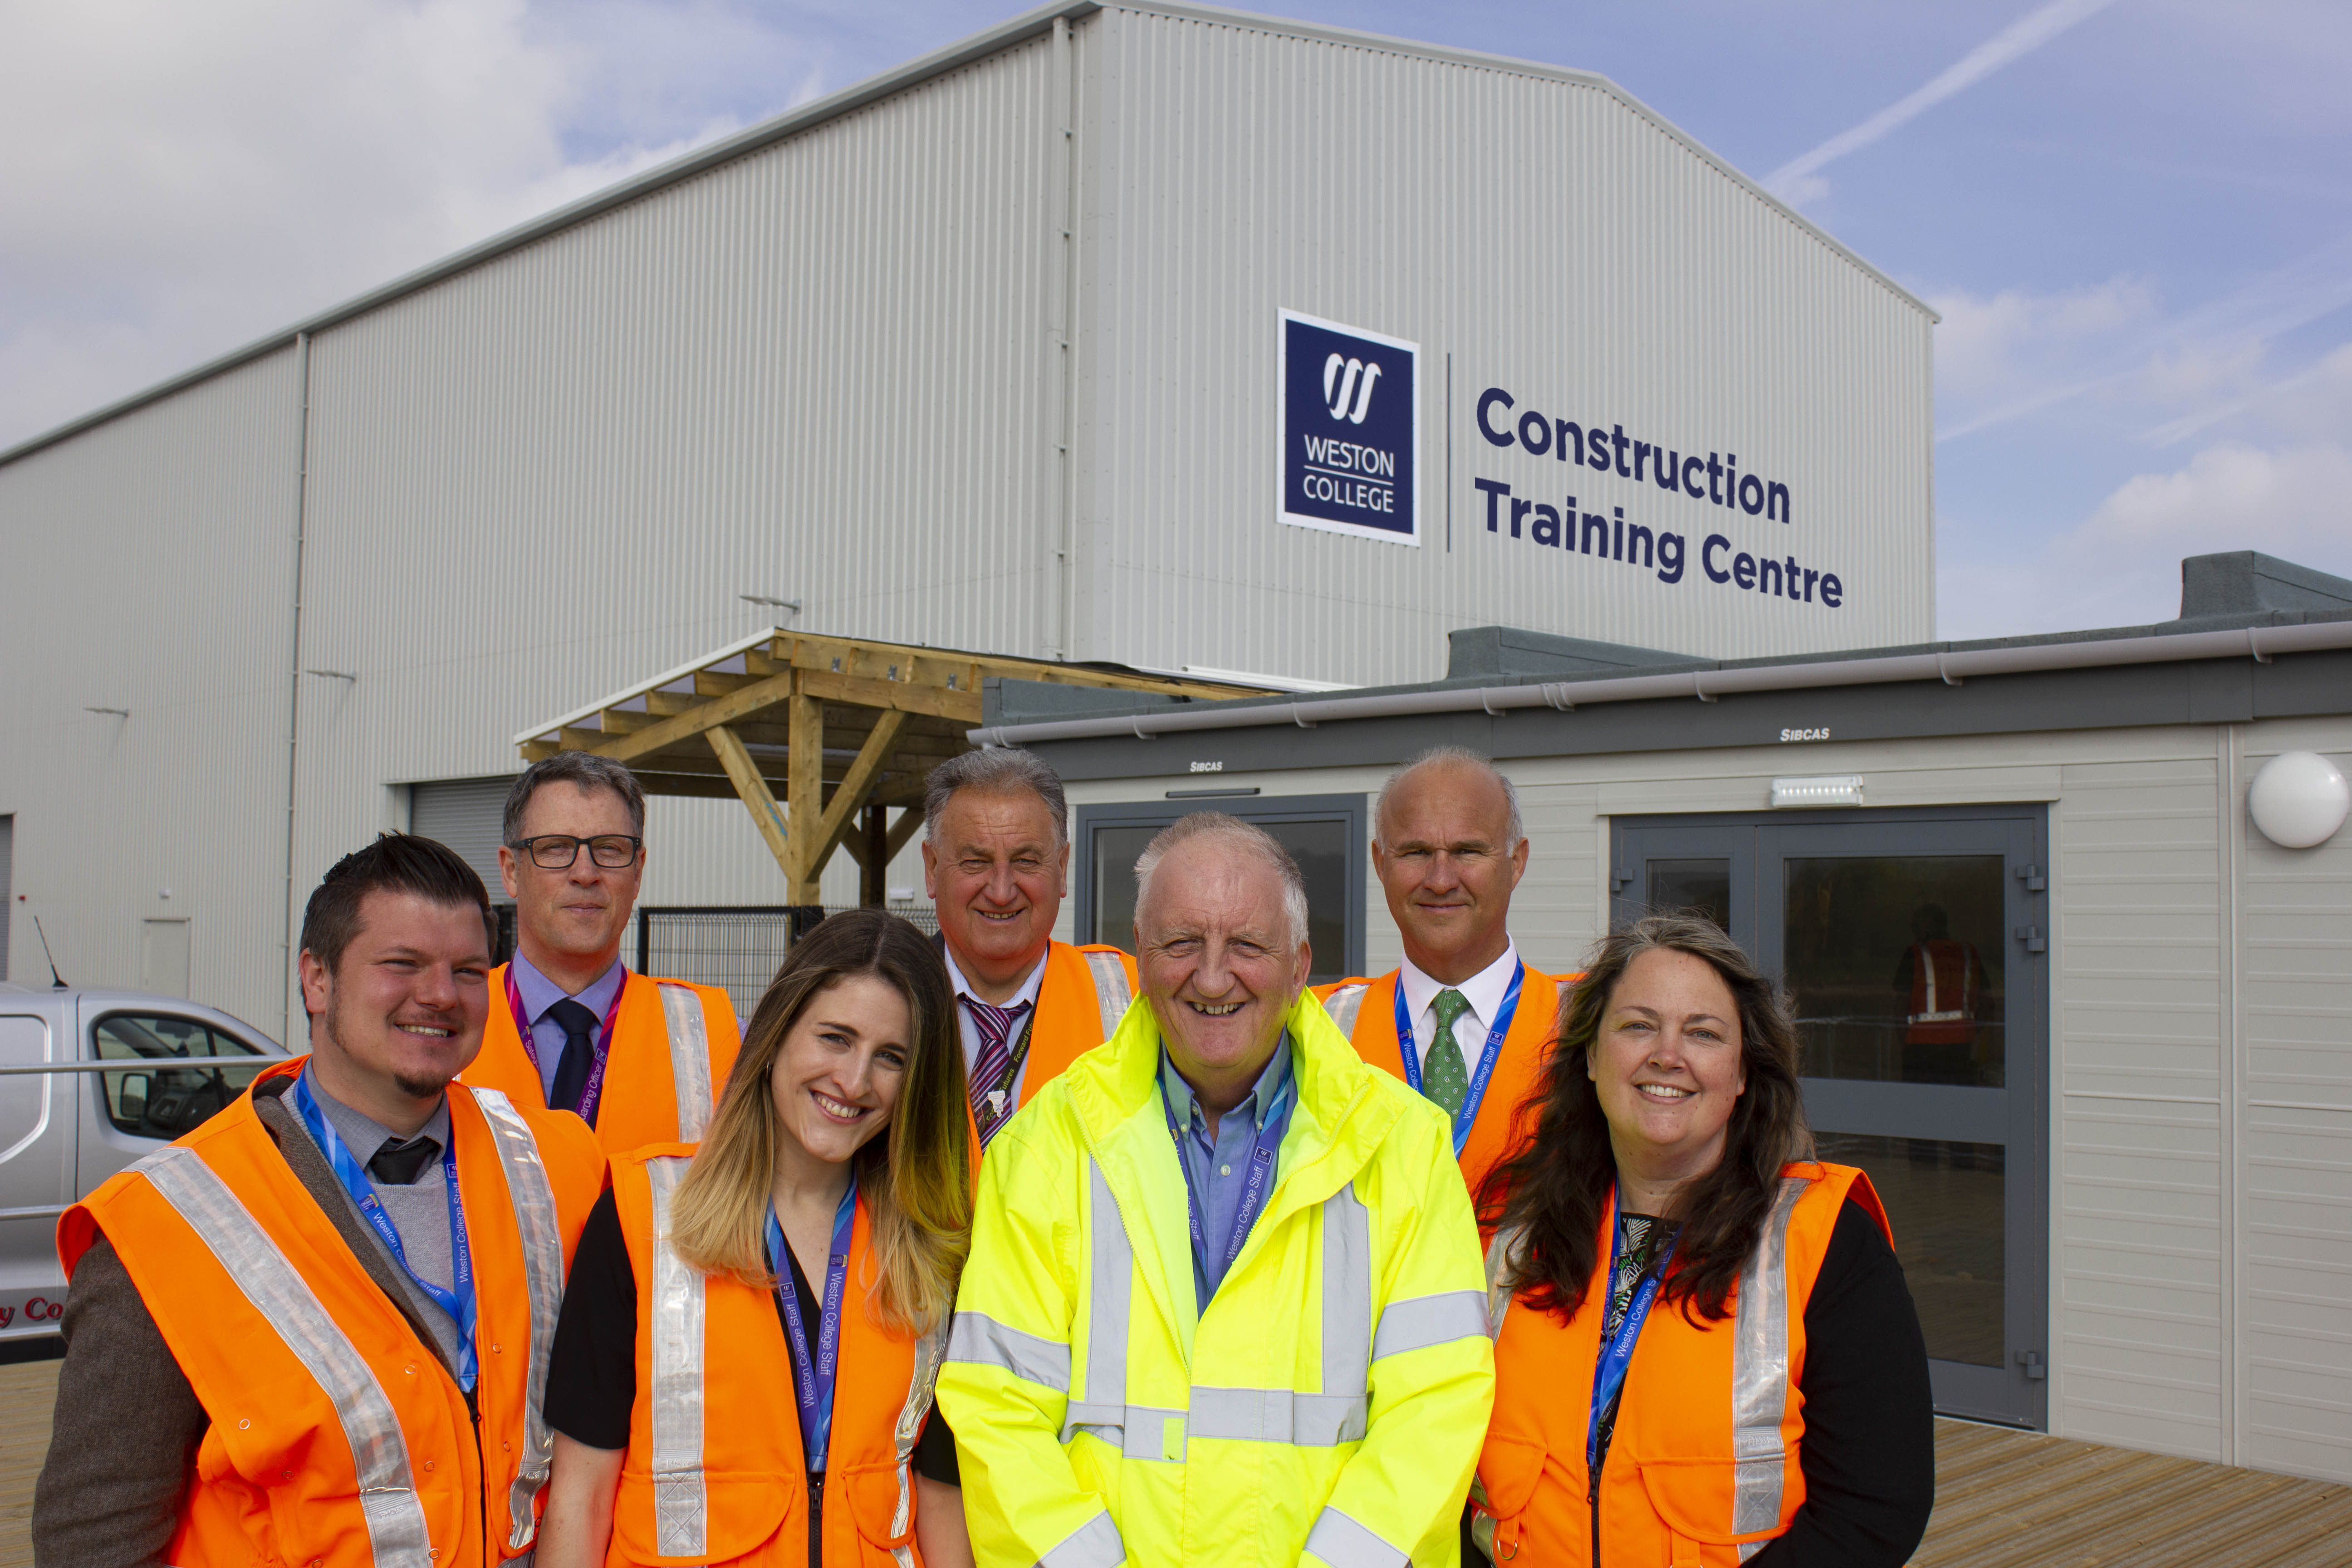 Featured image for “New multi-million pound training centre at Weston College to boost construction skills in the region”